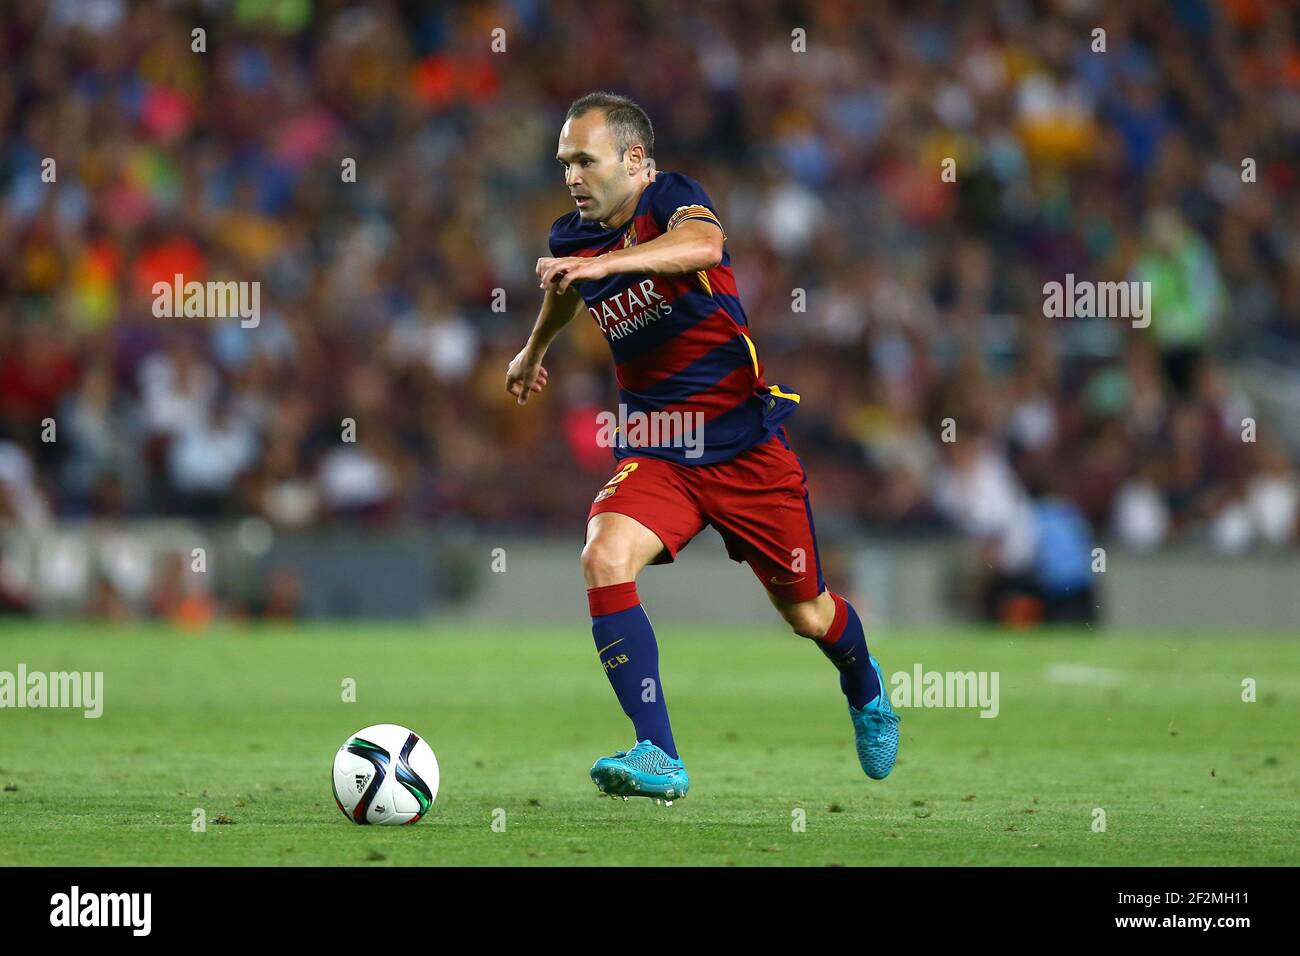 Andres Iniesta of FC Barcelona during the Spanish Supercup Final, 2nd leg, football match between and FC Barcelona and Athletic Club Bilbao on August 17, 2015 at the Camp Nou stadium in Barcelona, Spain - Photo Manuel Blondeau / AOP PRESS / DPPI Stock Photo